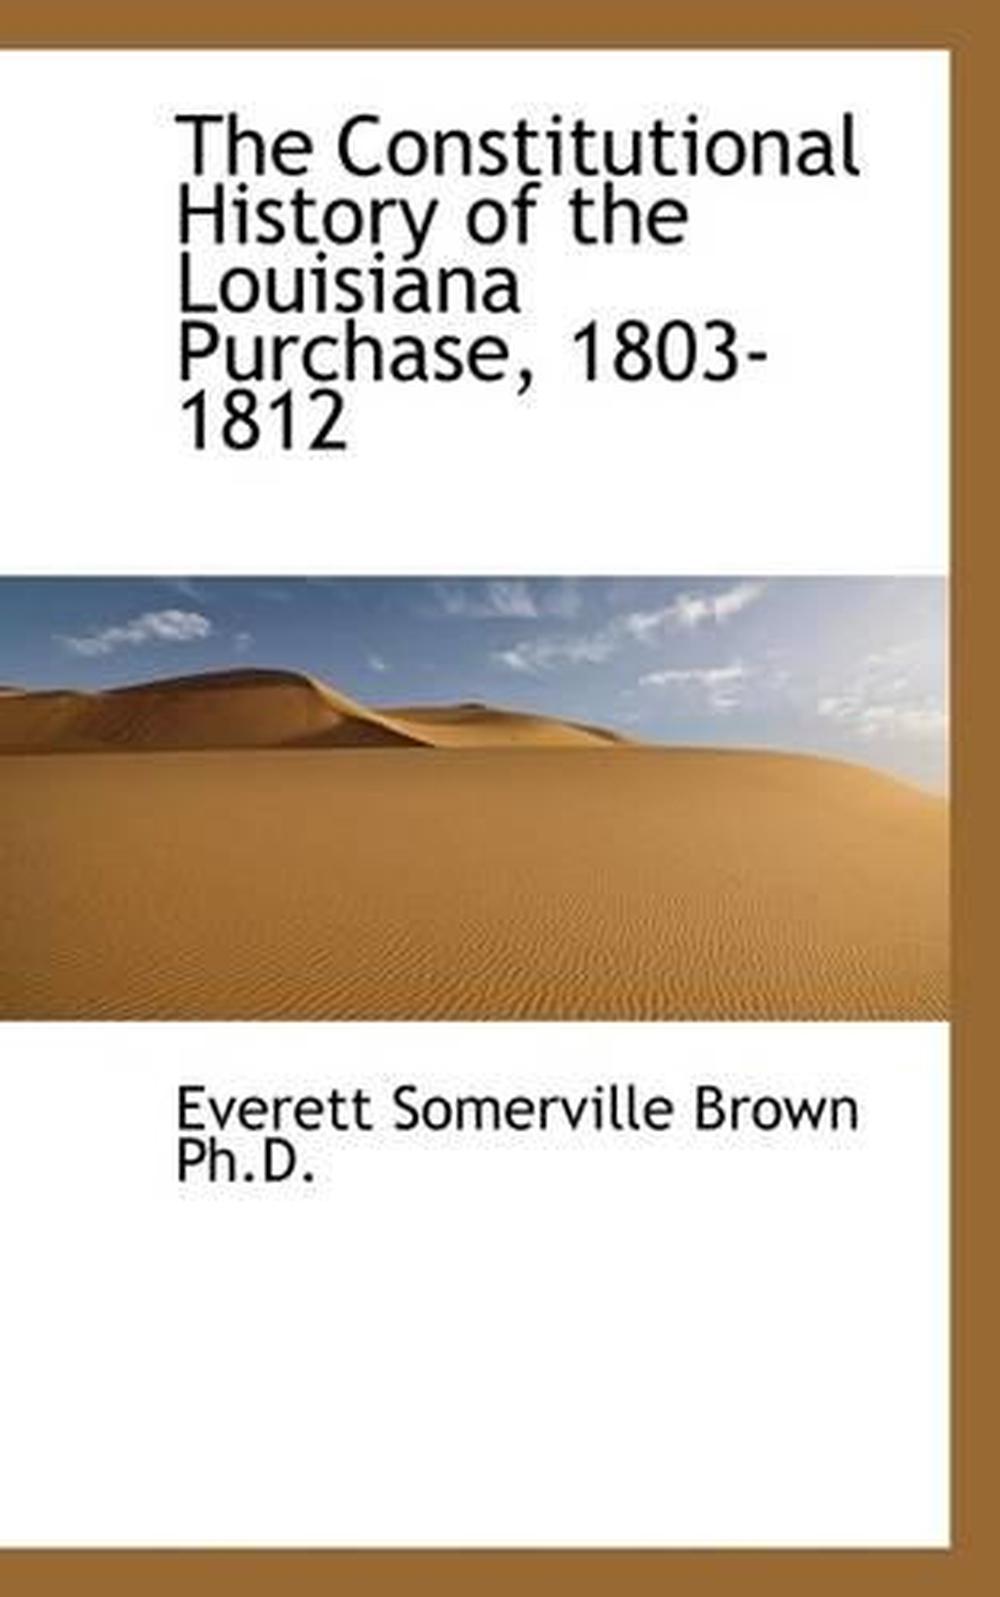 Constitutional History of the Louisiana Purchase, 1803-1812 by Everett Somerv Br | eBay